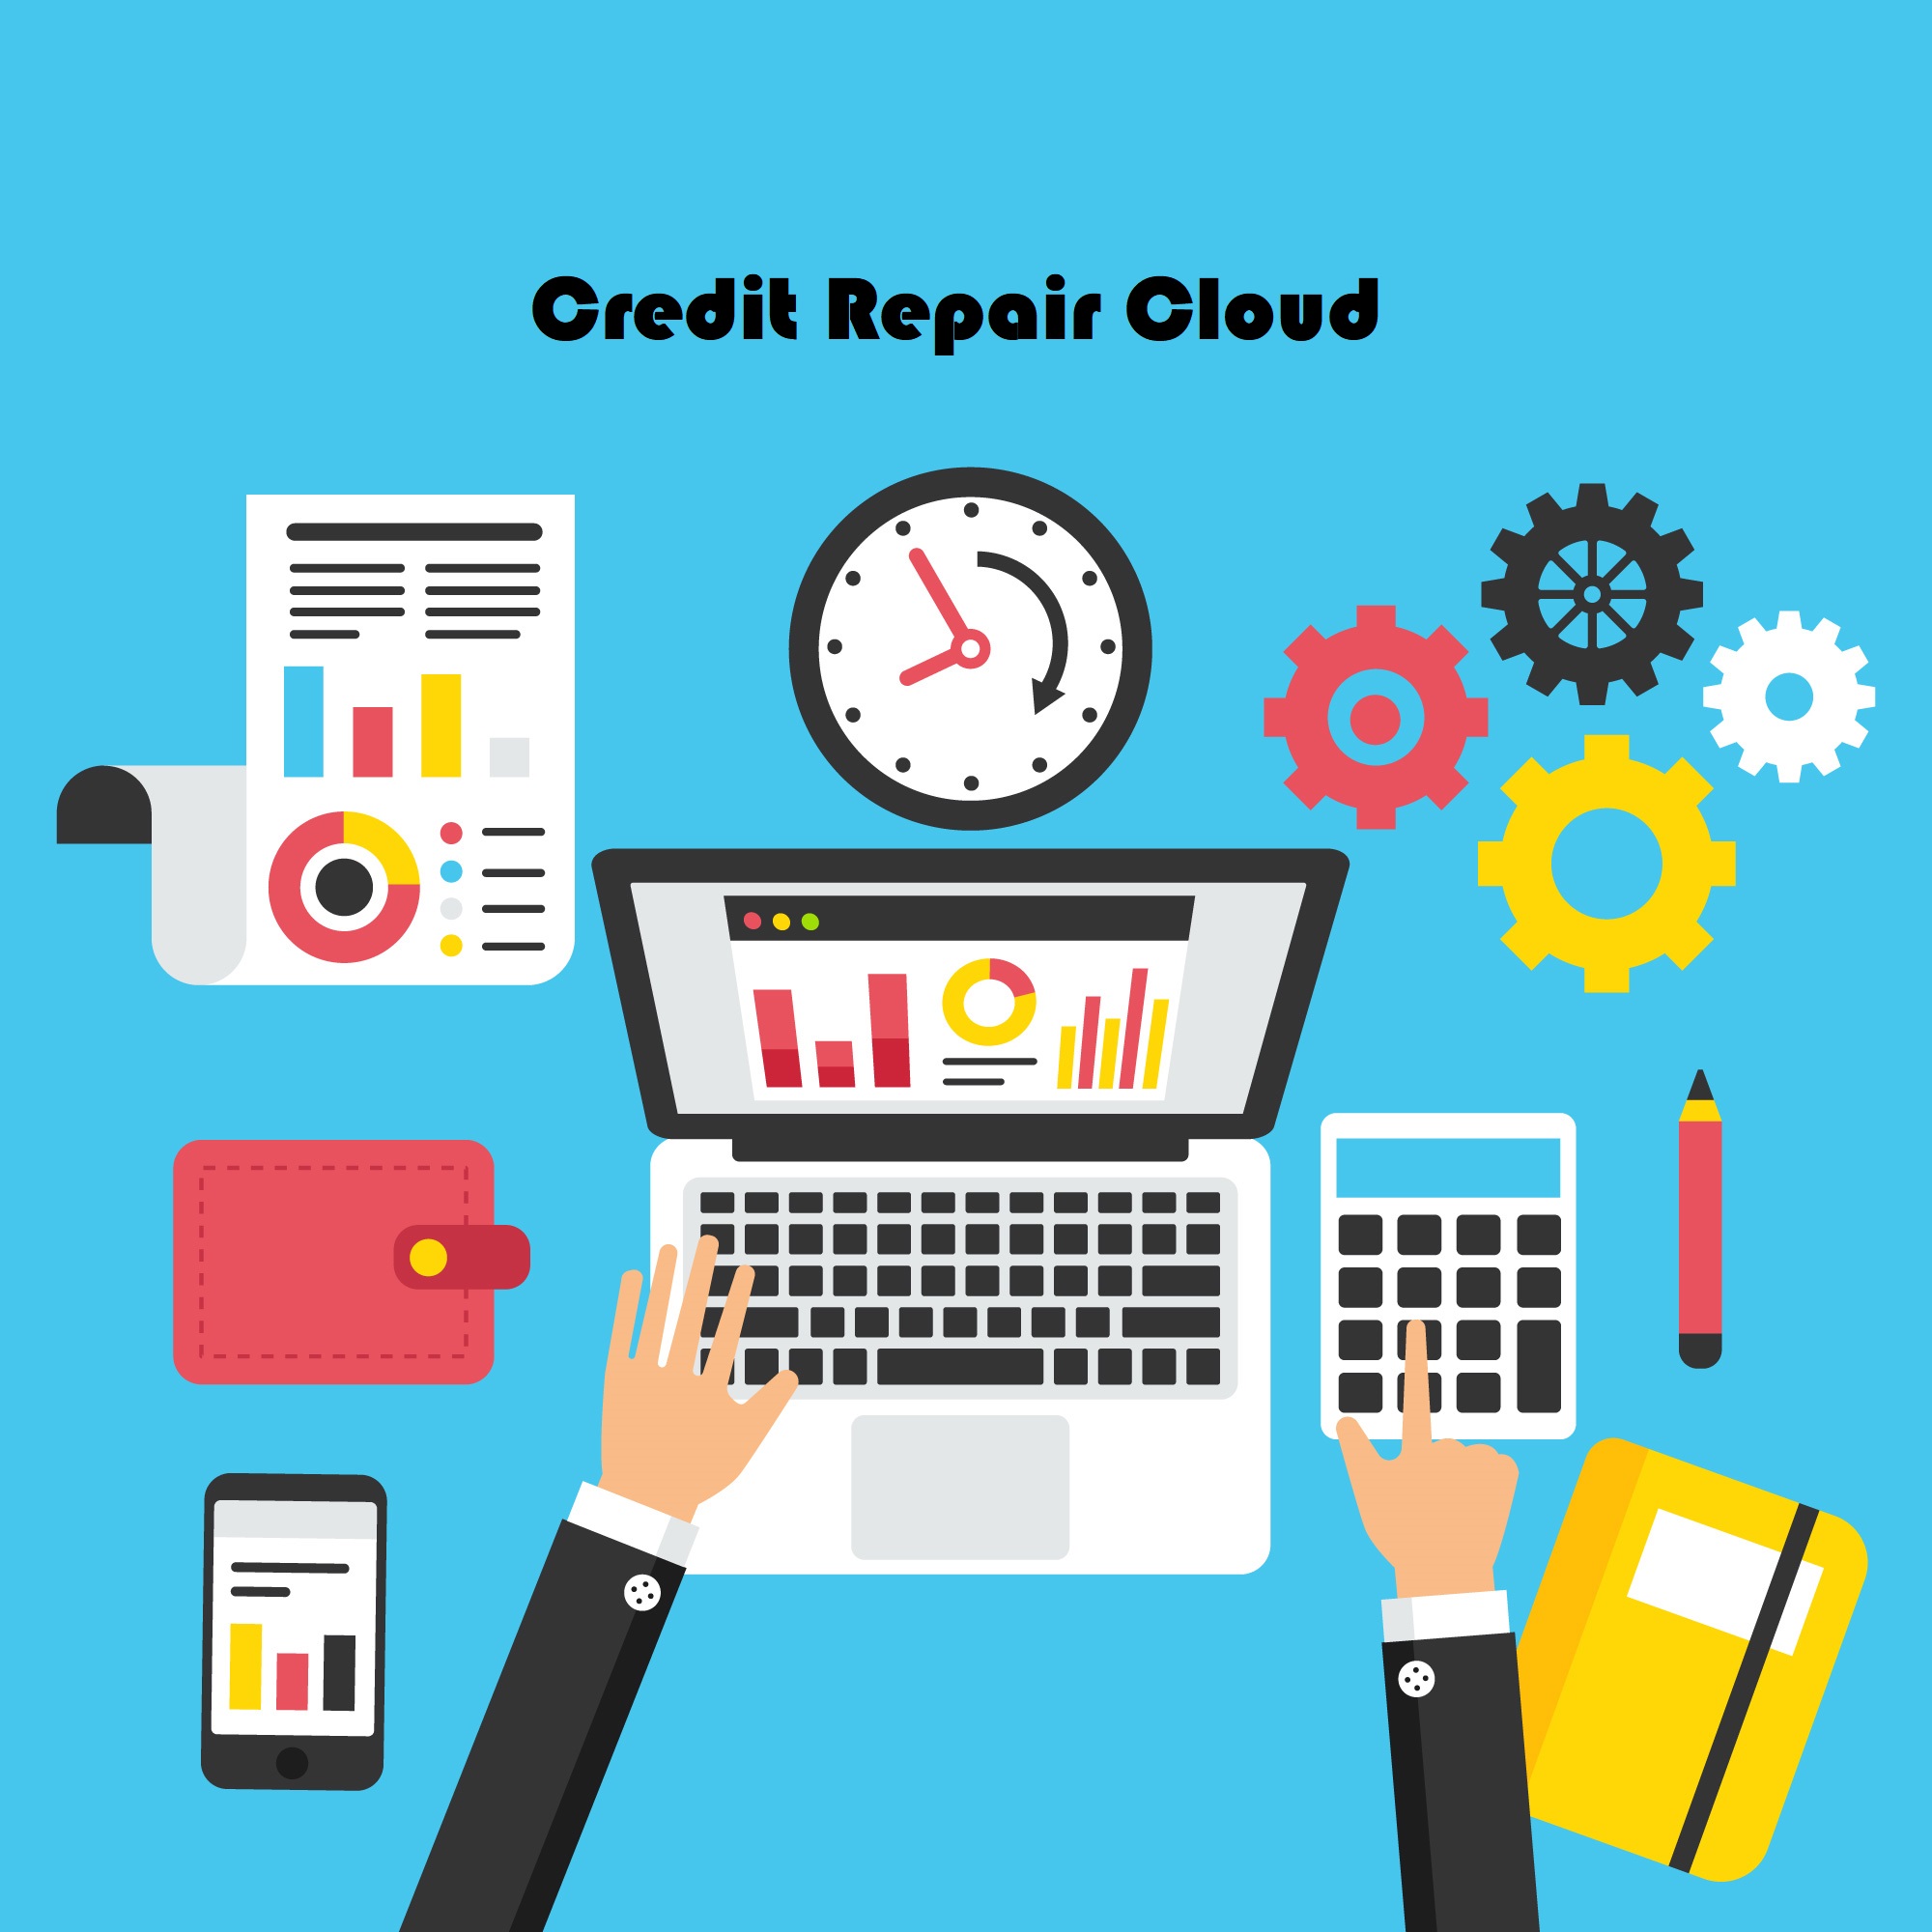 Boost Your Credit Score Fast with Montgomery's Top Credit Repair Software ðŸ¤µ